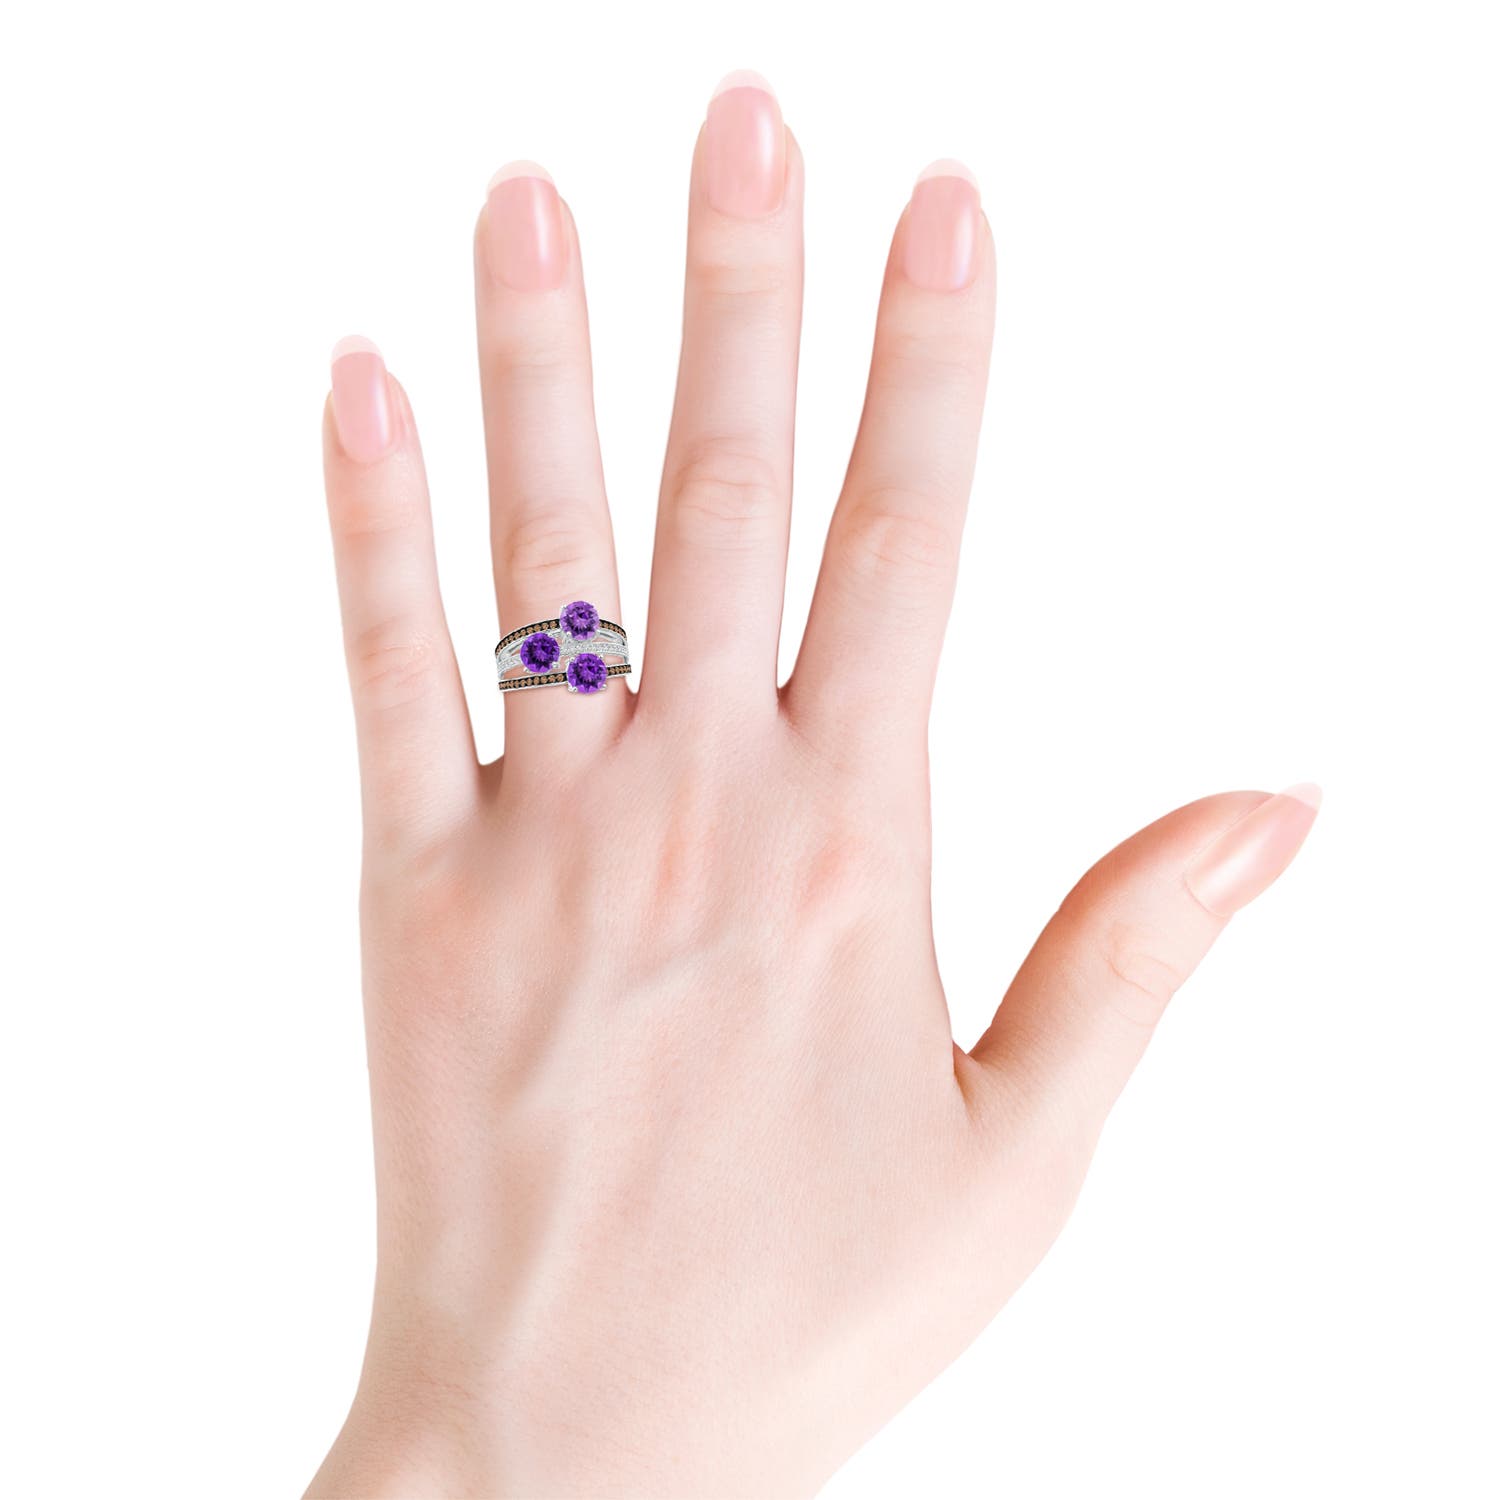 AAA - Amethyst / 2.76 CT / 14 KT White Gold